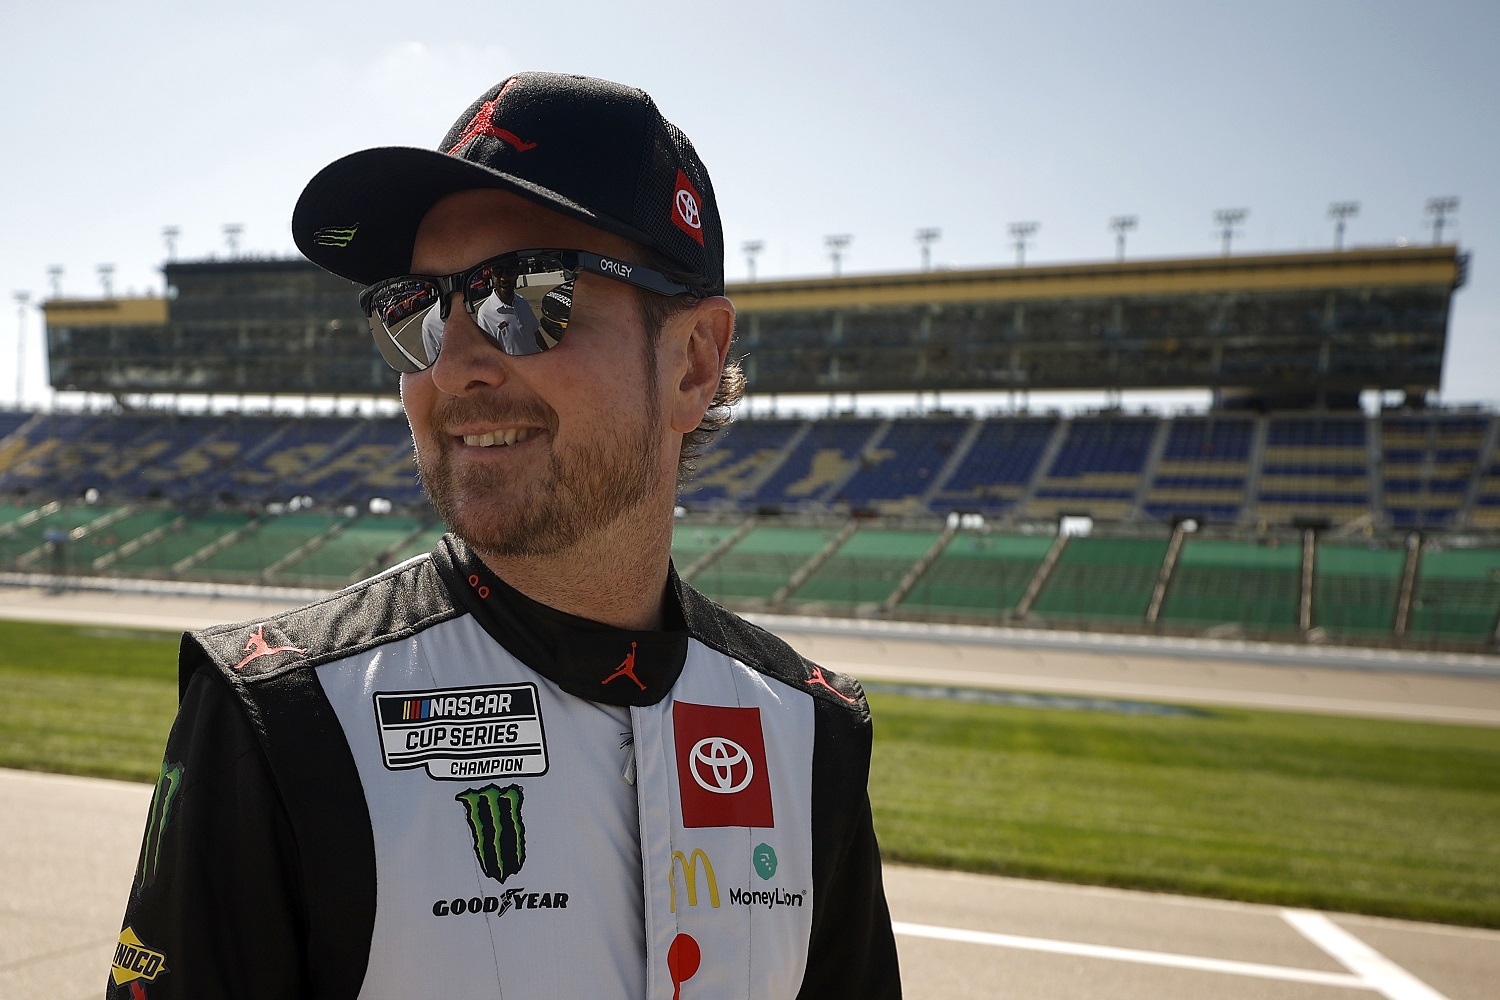 Kurt Busch, driver of the No, 45 Toyota, walks the grid during practice for the NASCAR Cup Series AdventHealth 400 at Kansas Speedway on May 14, 2022.